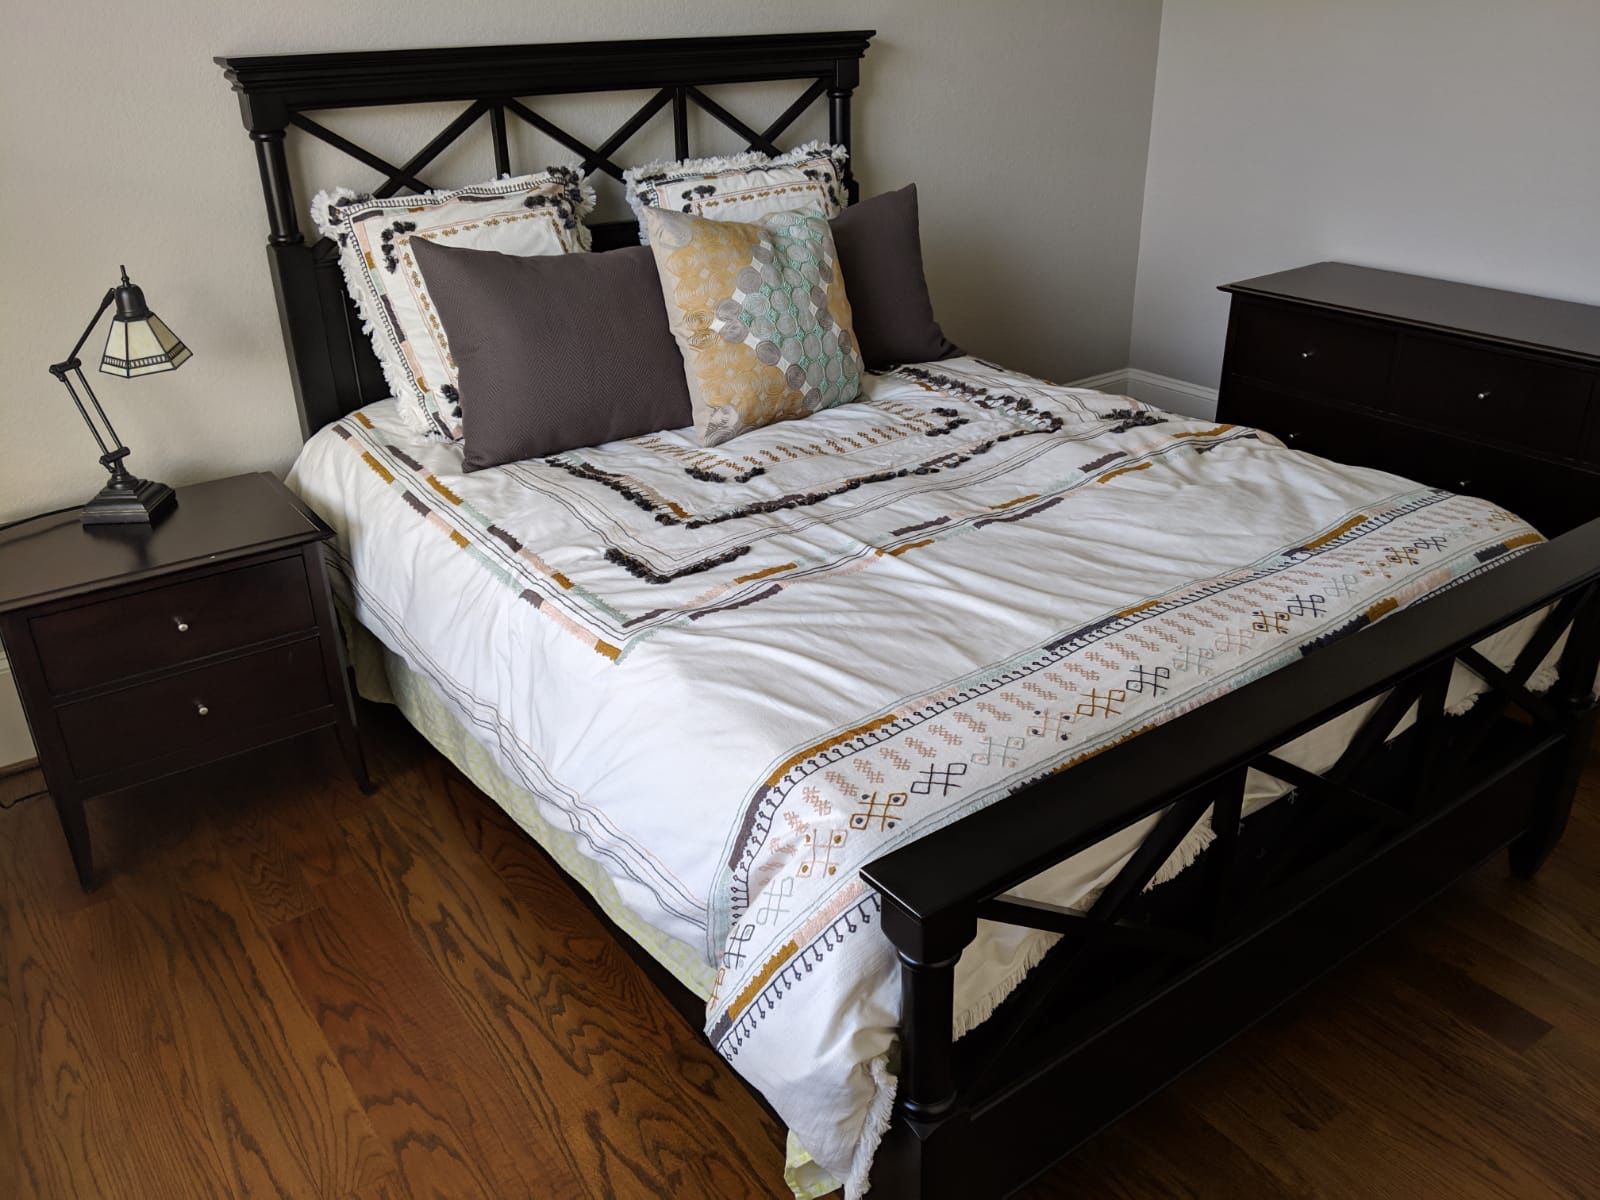 Bedroom furniture, $3000+ in value can be sold as a set with steep discount, or as individual pieces